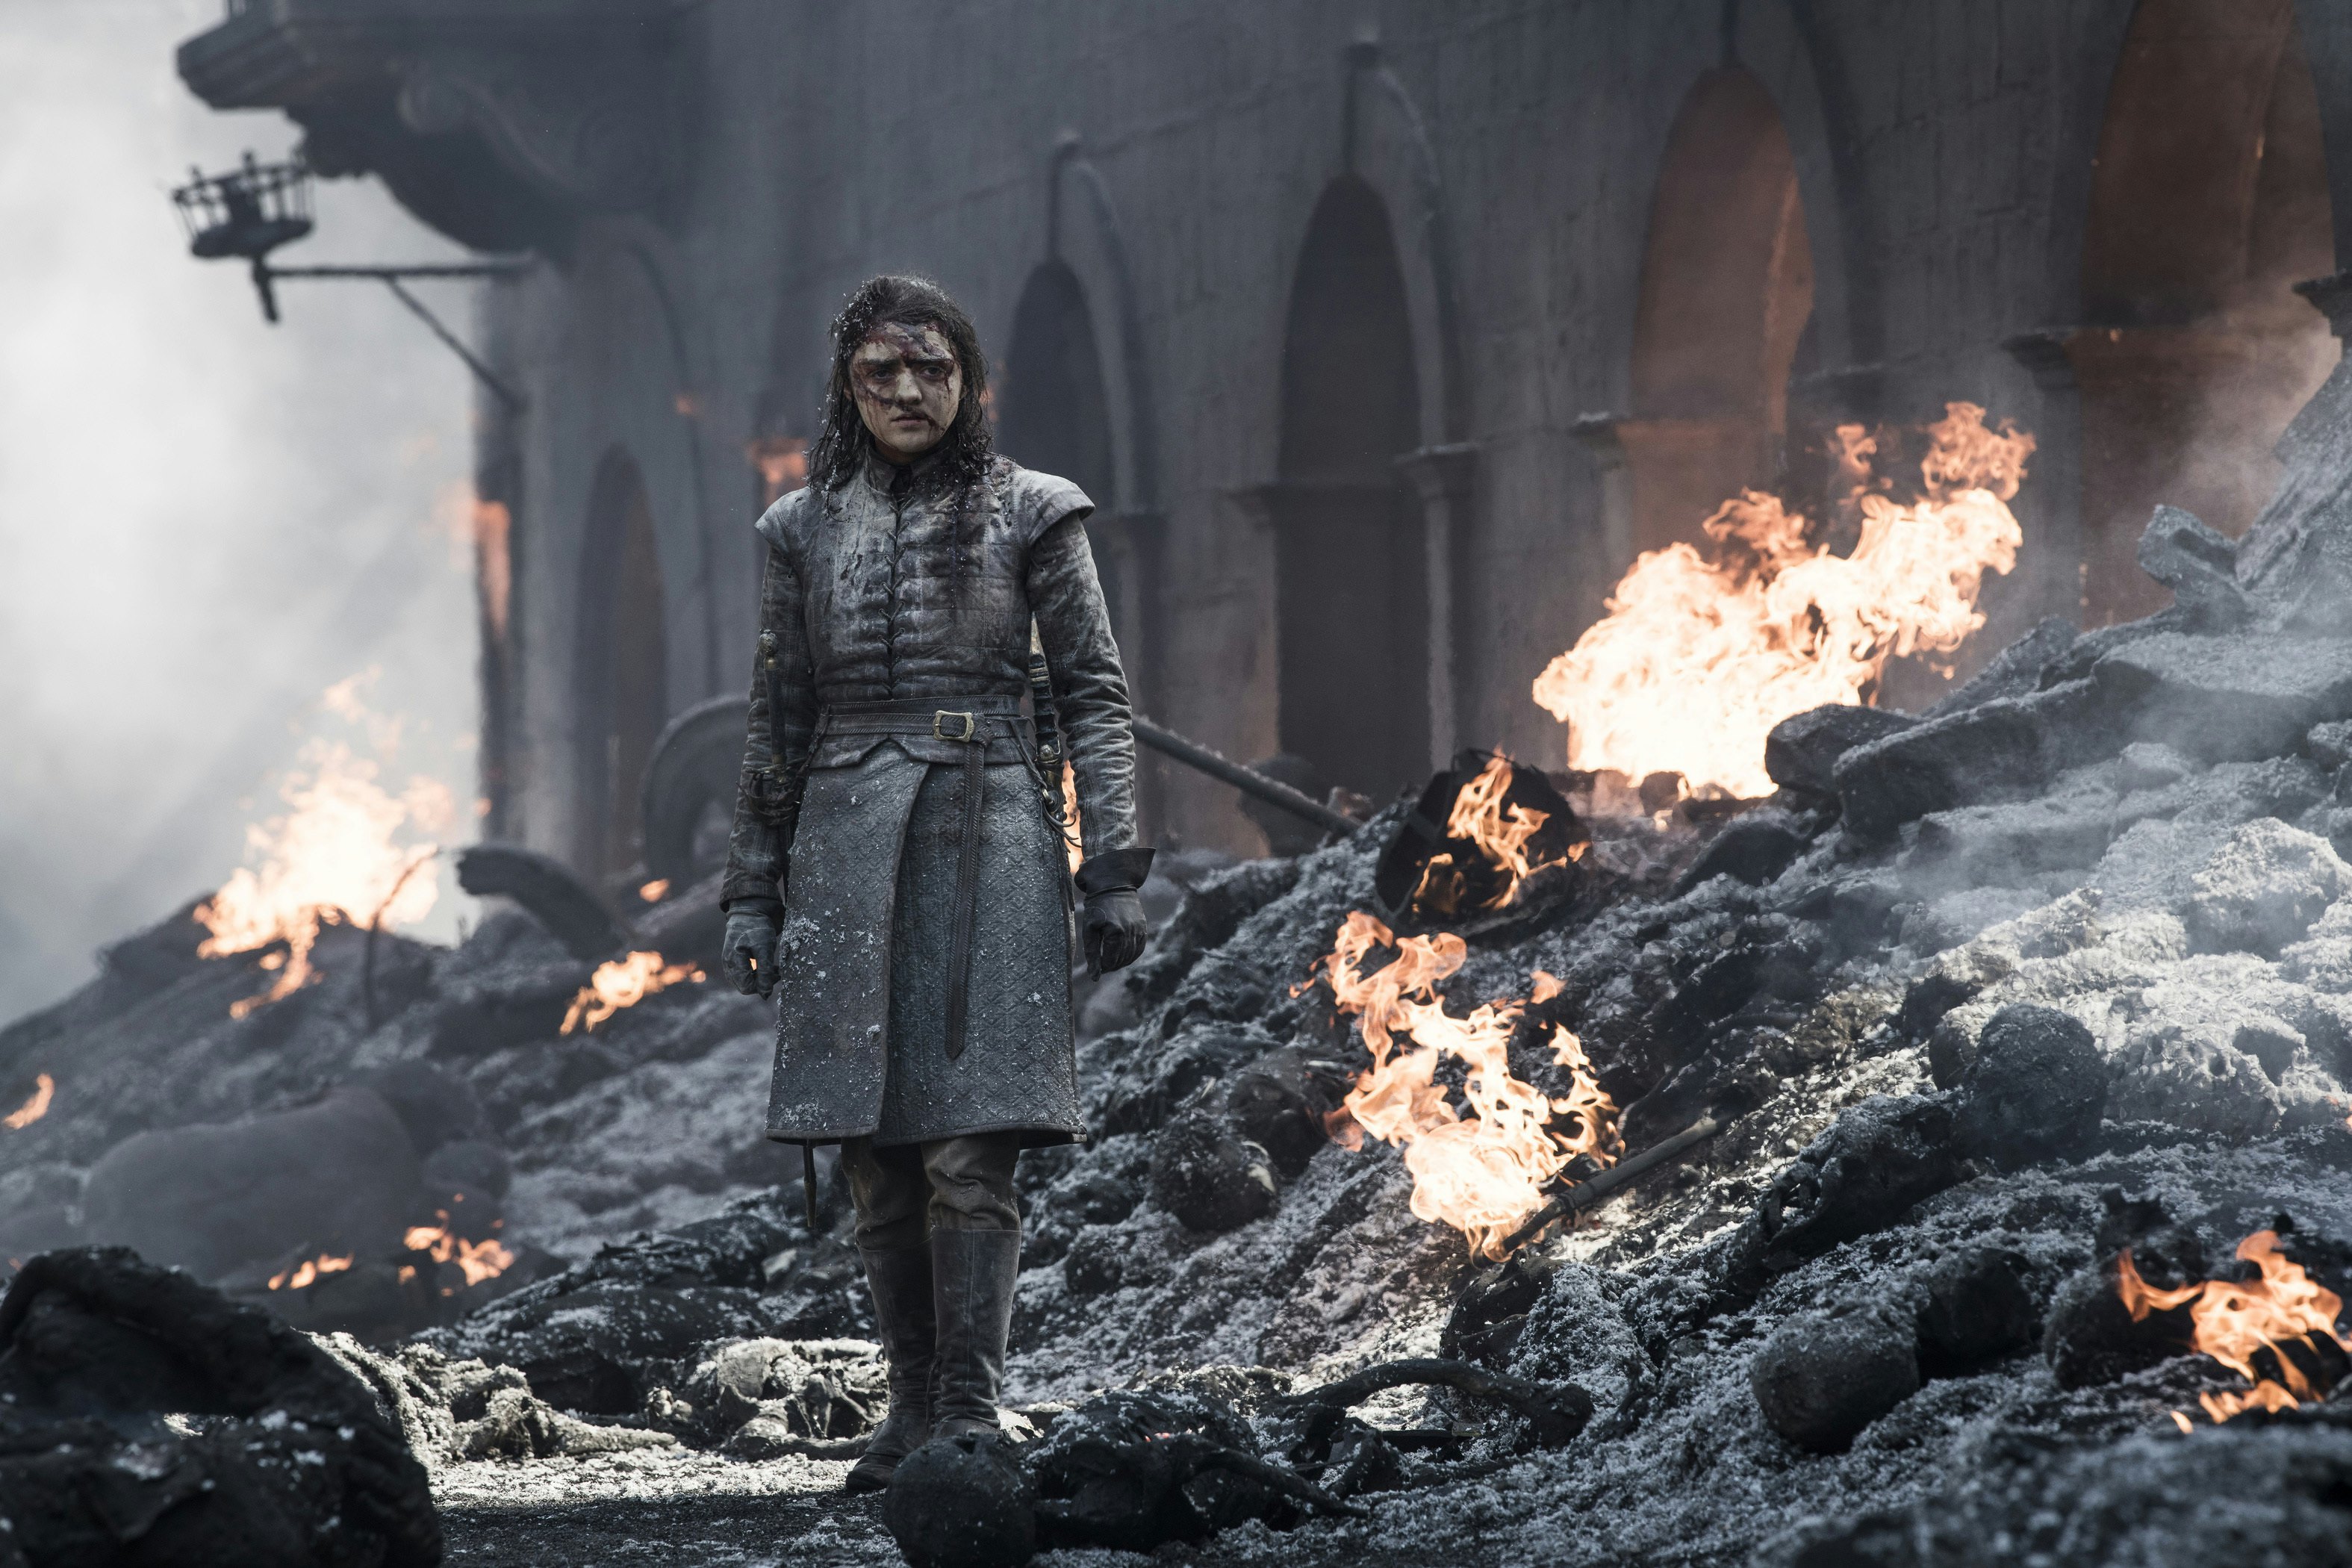 Game Of Thrones Season 8 Only Deserved 7 Of Its 10 Emmy Wins Last